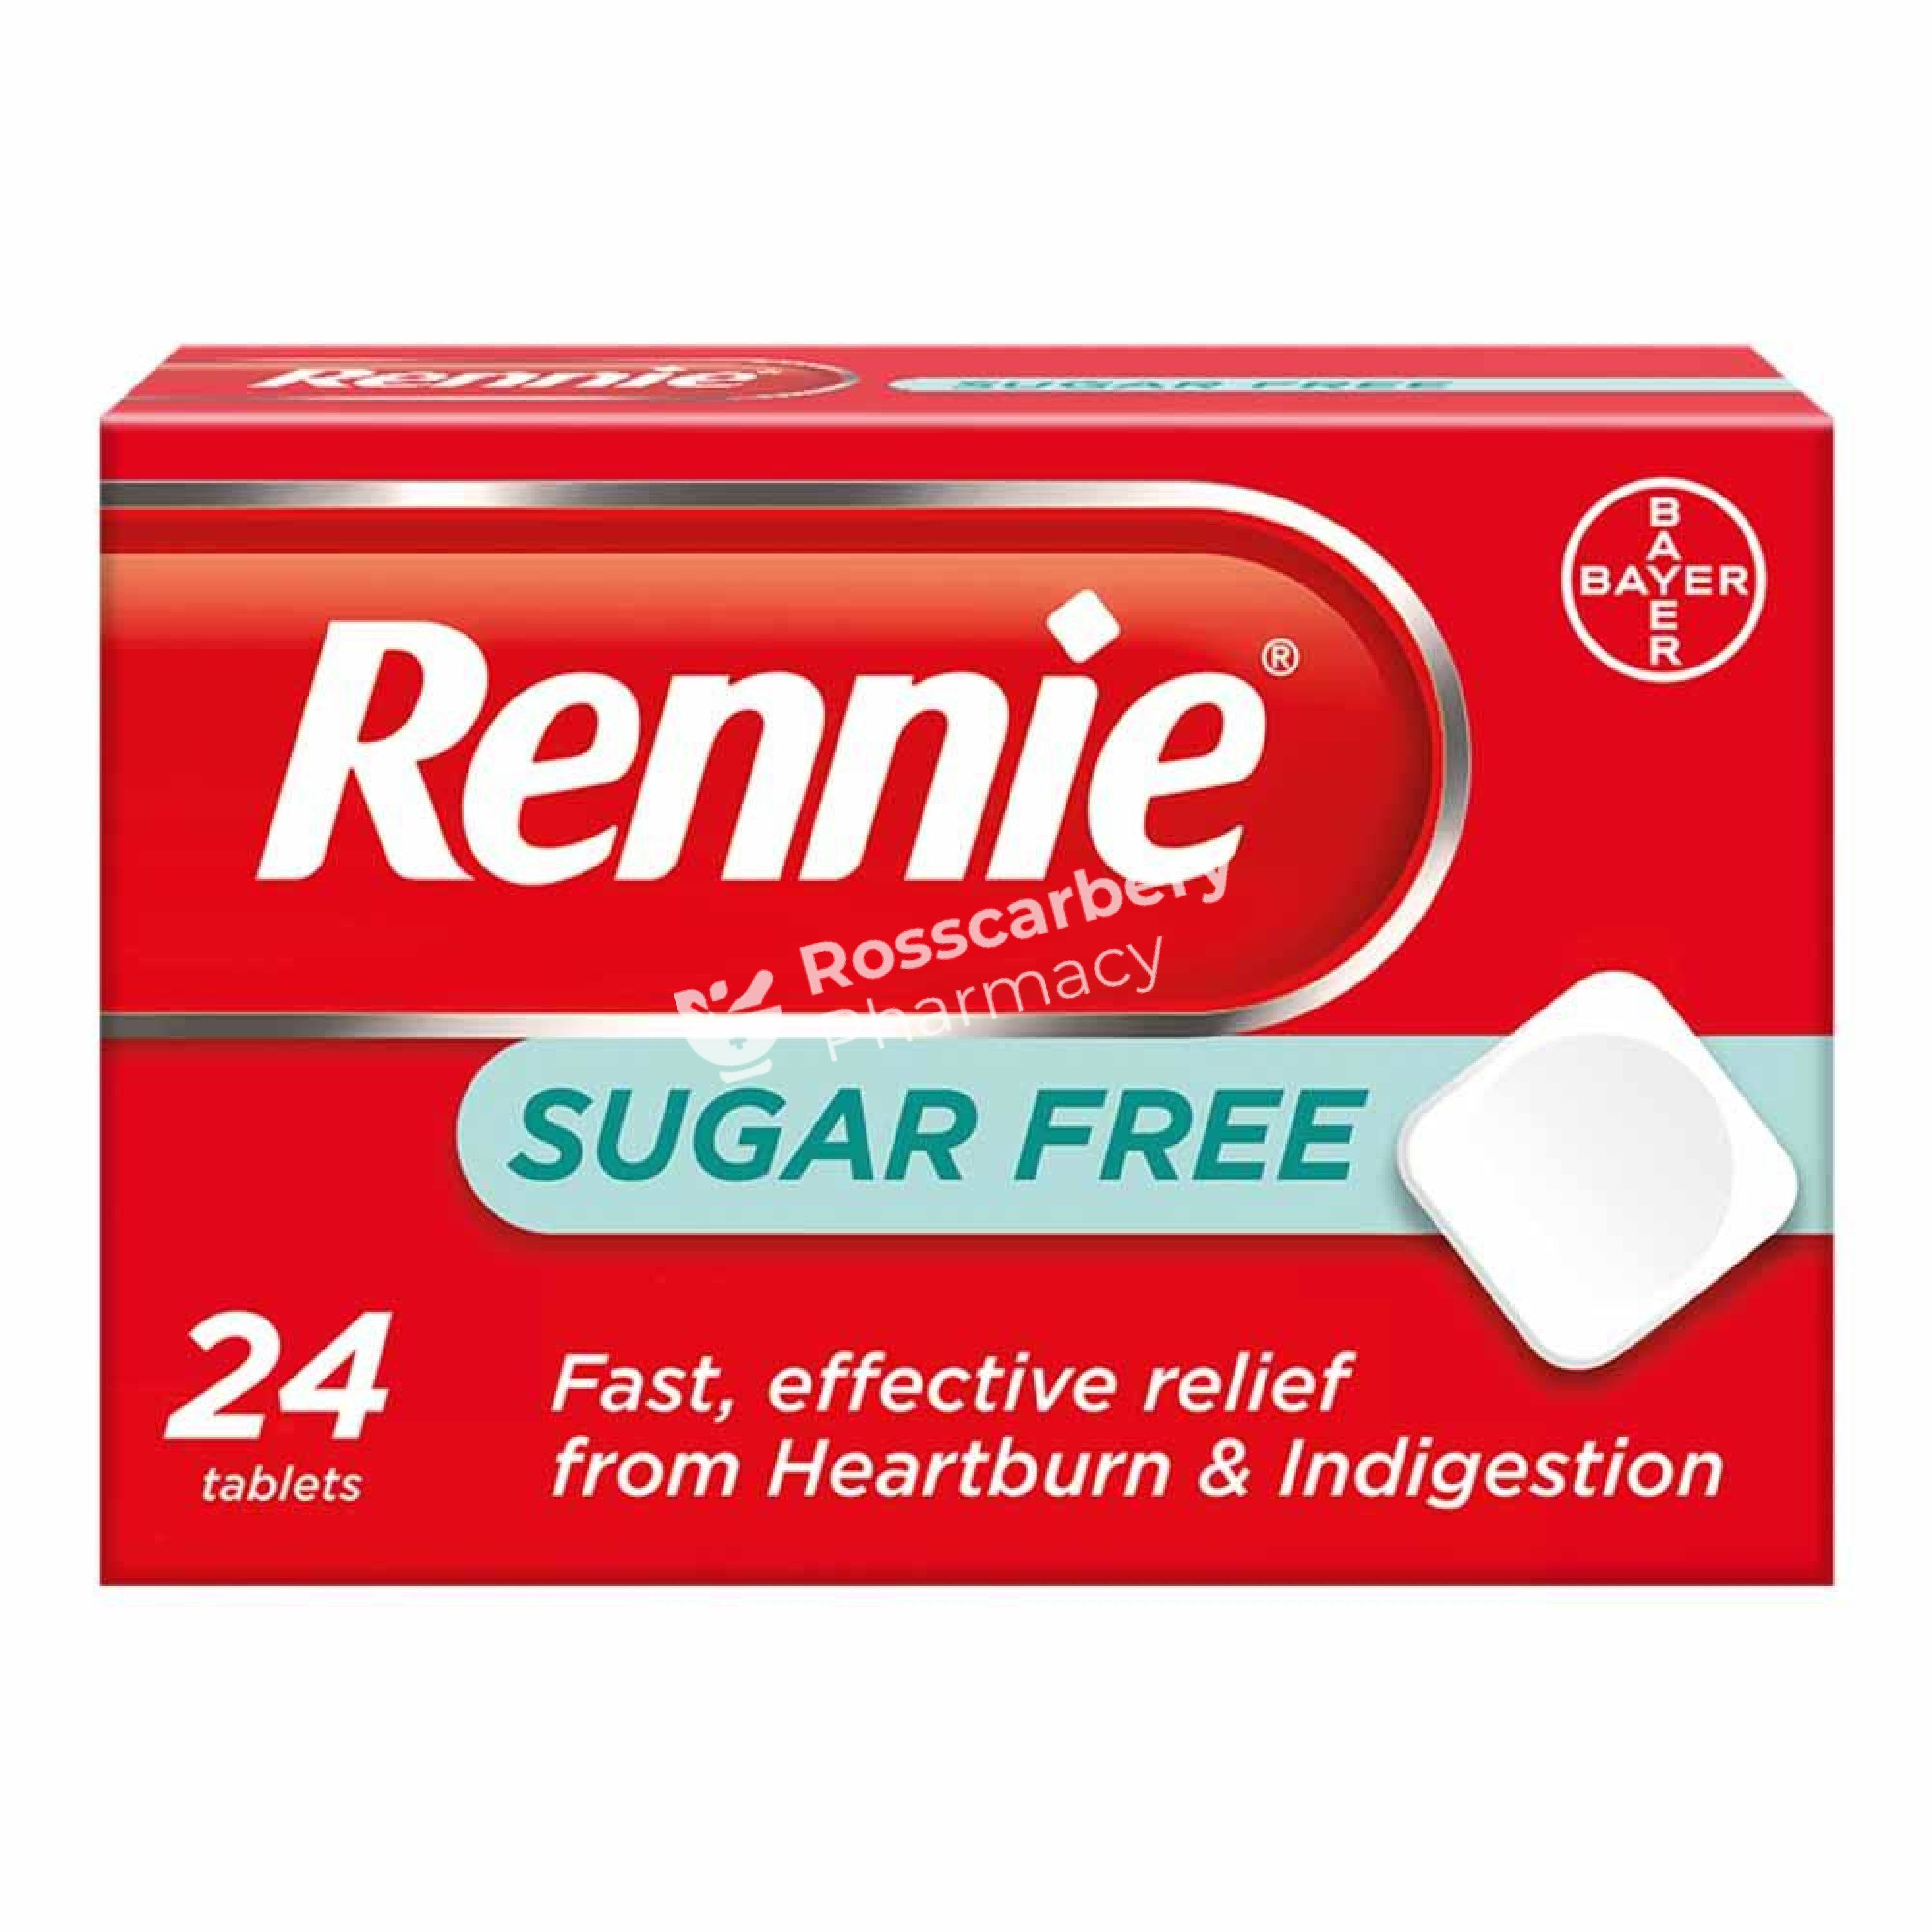 Rennie Indigestion and Heartburn Relief Tablets - Sugar Free, Chewable, 24 Tablets